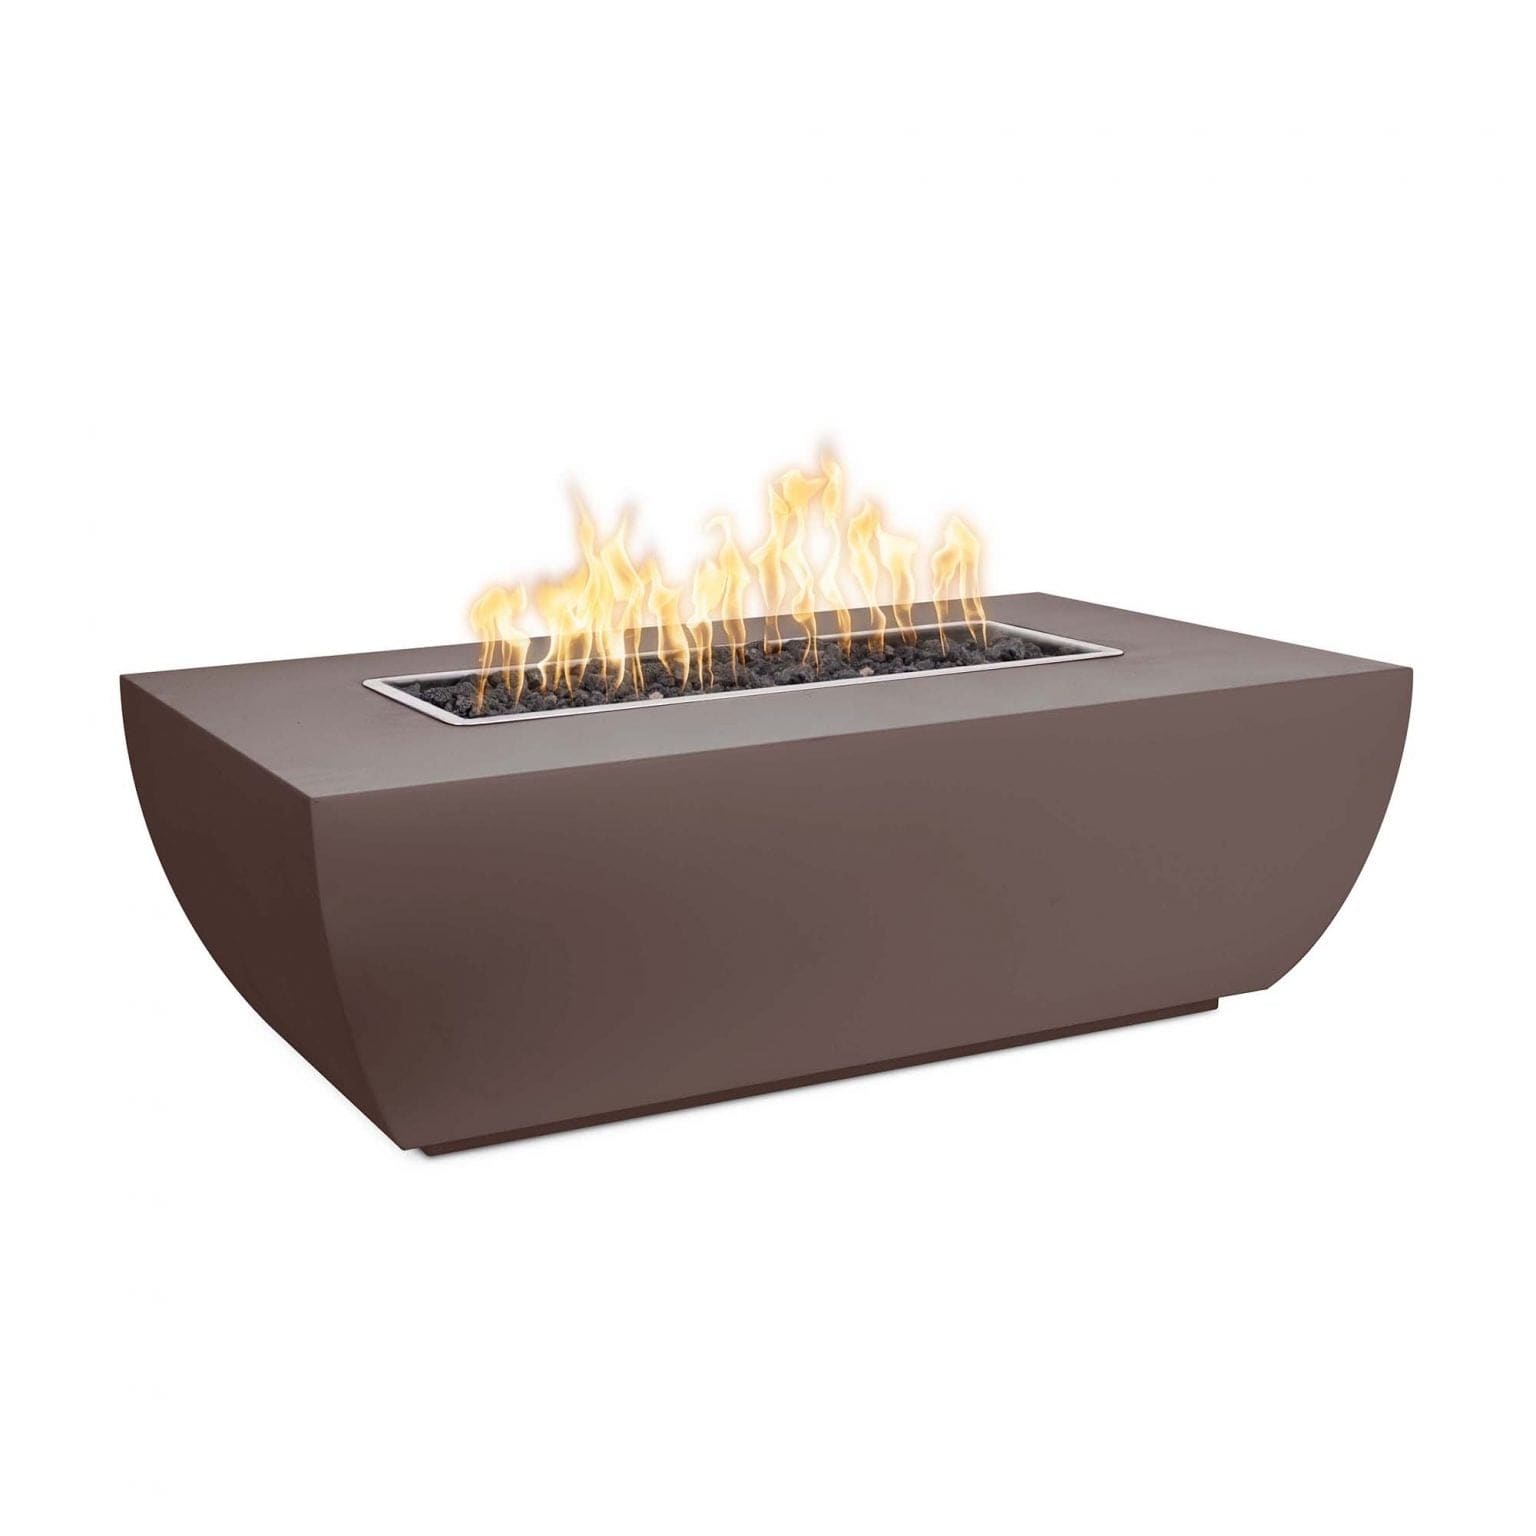 The Outdoor Plus Fire Pit 48" x 28" / Match Lit The Outdoor Plus Avalon 24" Tall Linear Fire Pit | Metal Powder Coat OPT-AVLPC4824